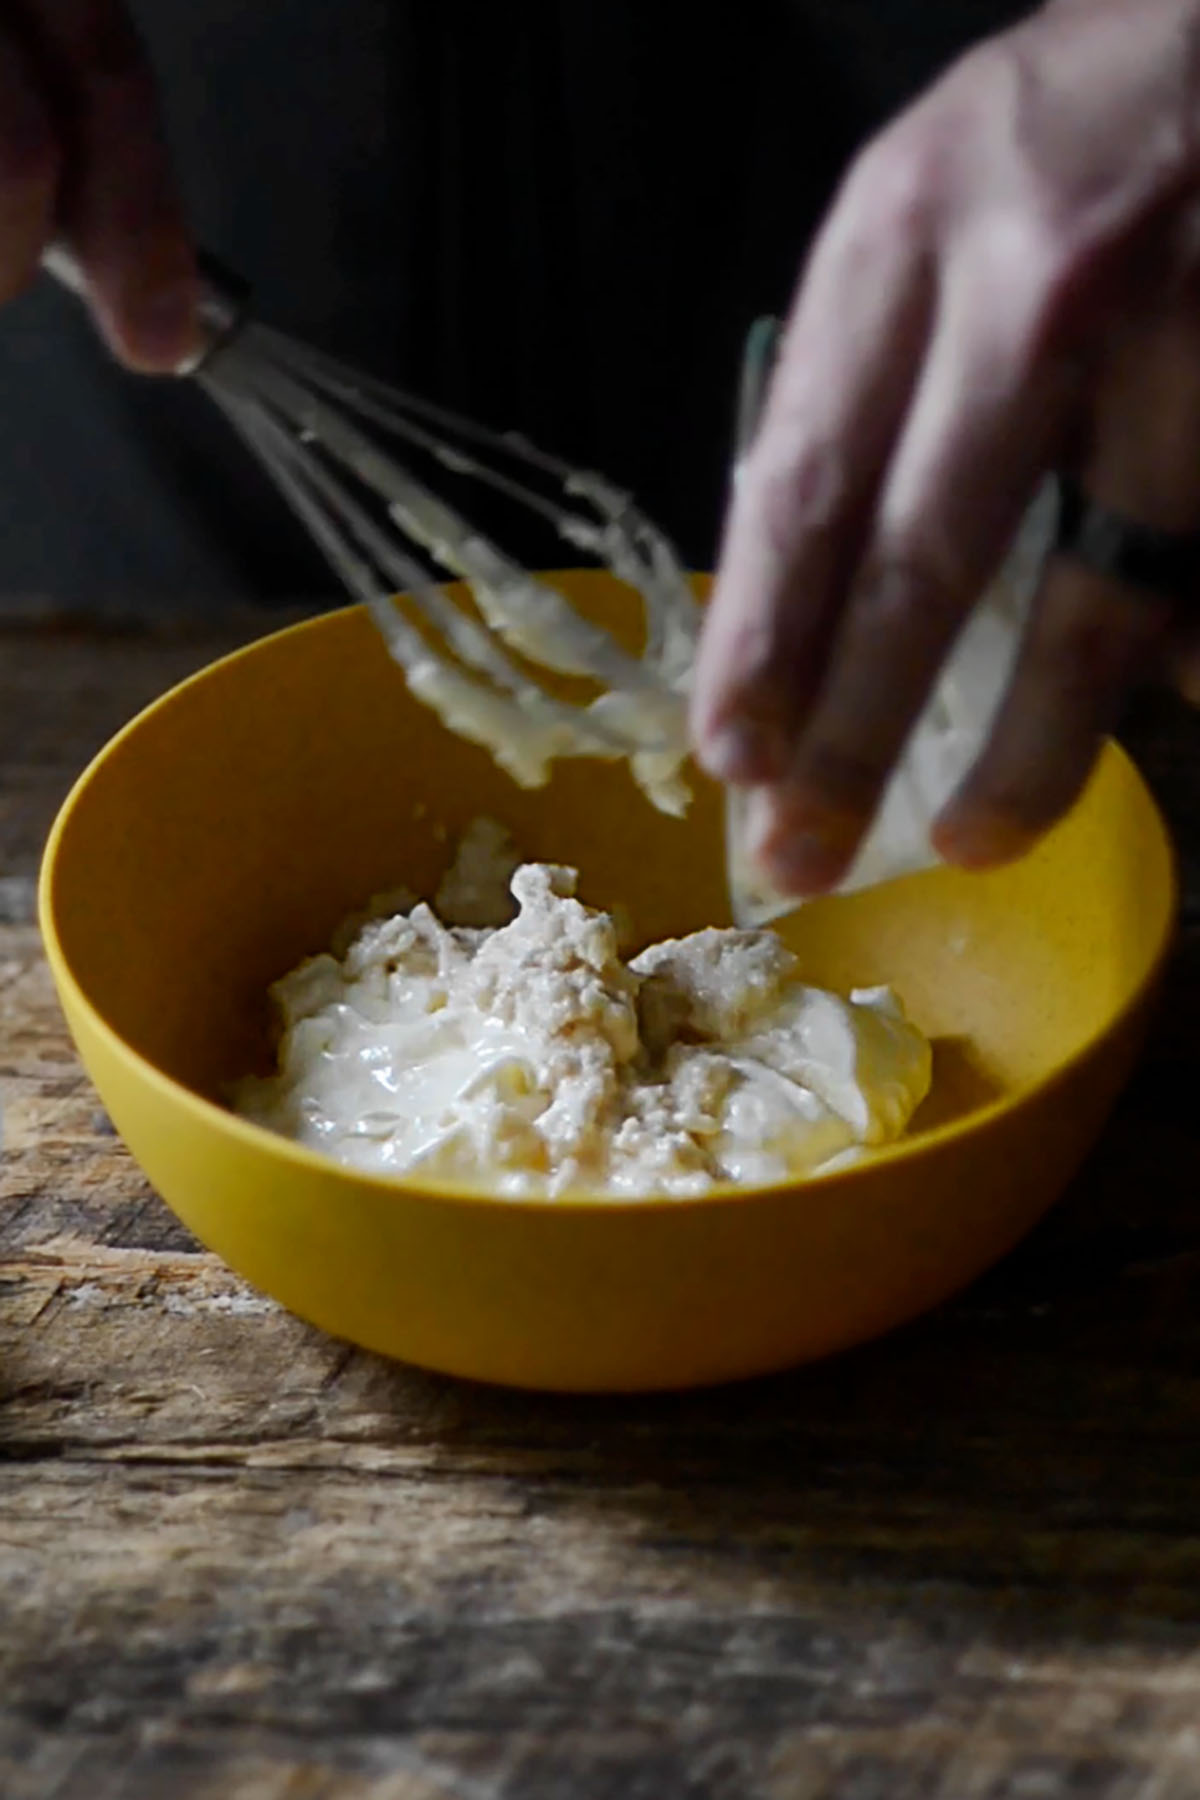 Fresh horseradish being added to a vinegar and mayonnaise mixture in a mixing bowl.